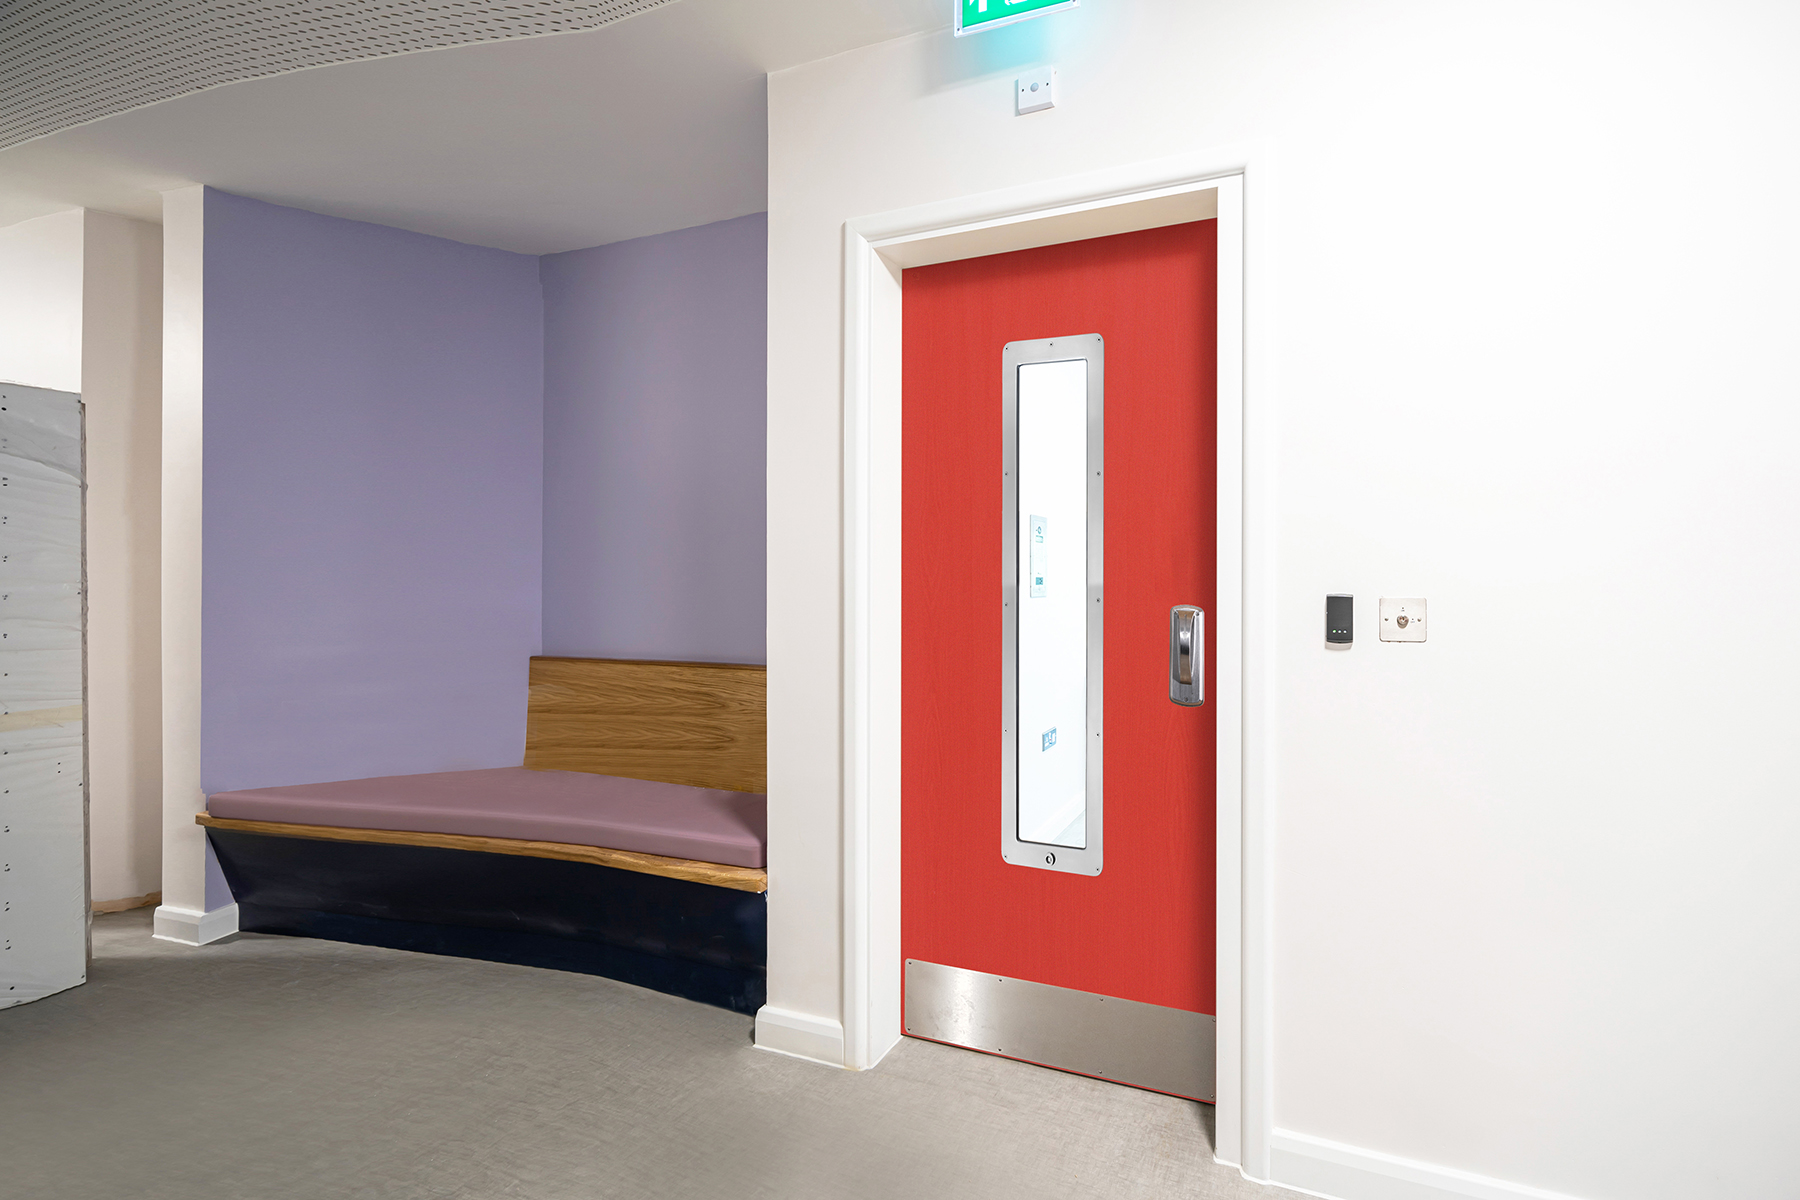 A Single-Action Ligature-Resistant Door System for Behavioral Health facilities.